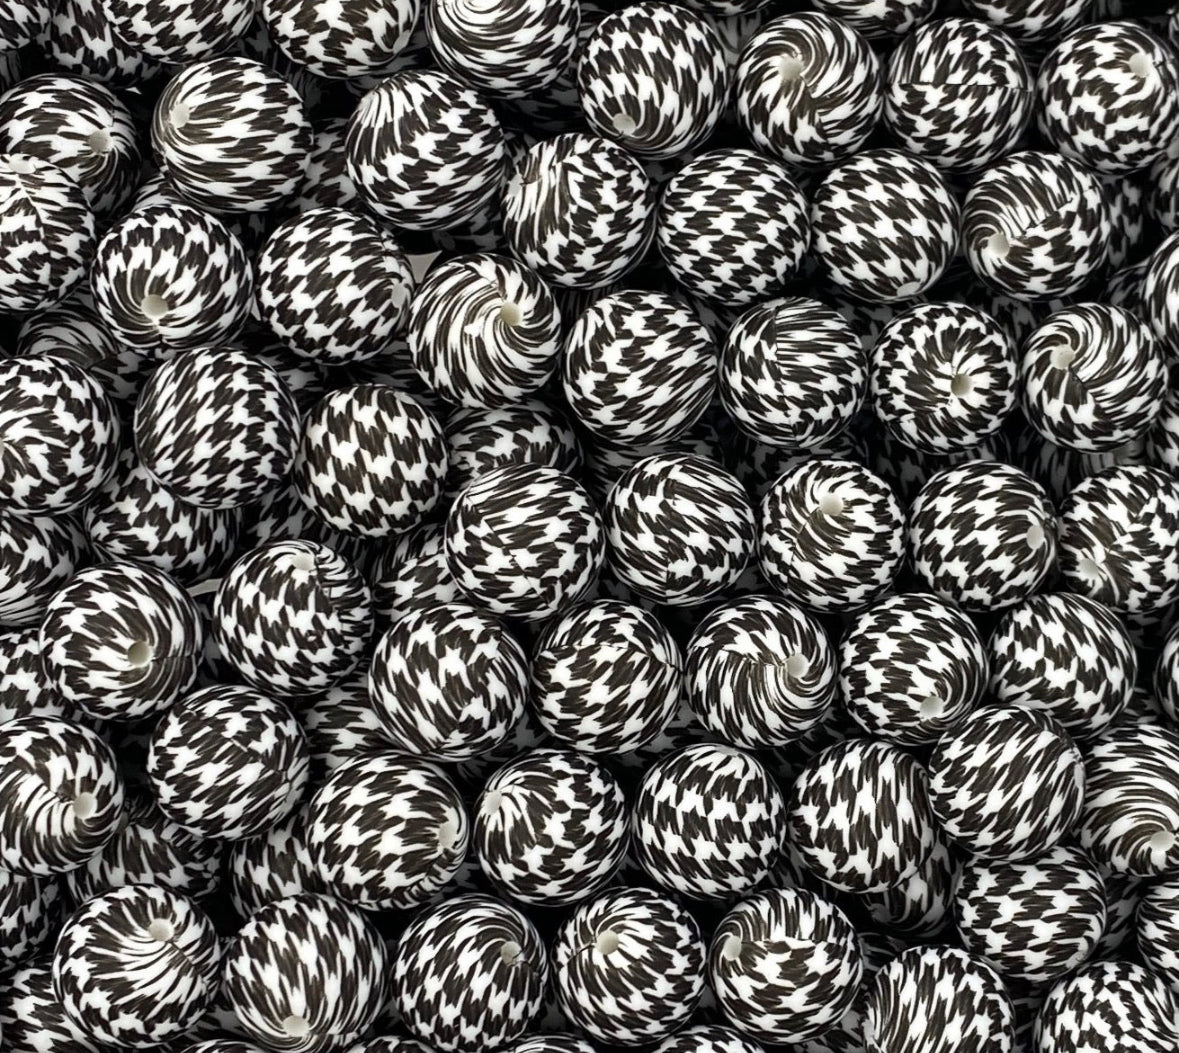 CTS Creation: Houndstooth Printed 19mm Bead